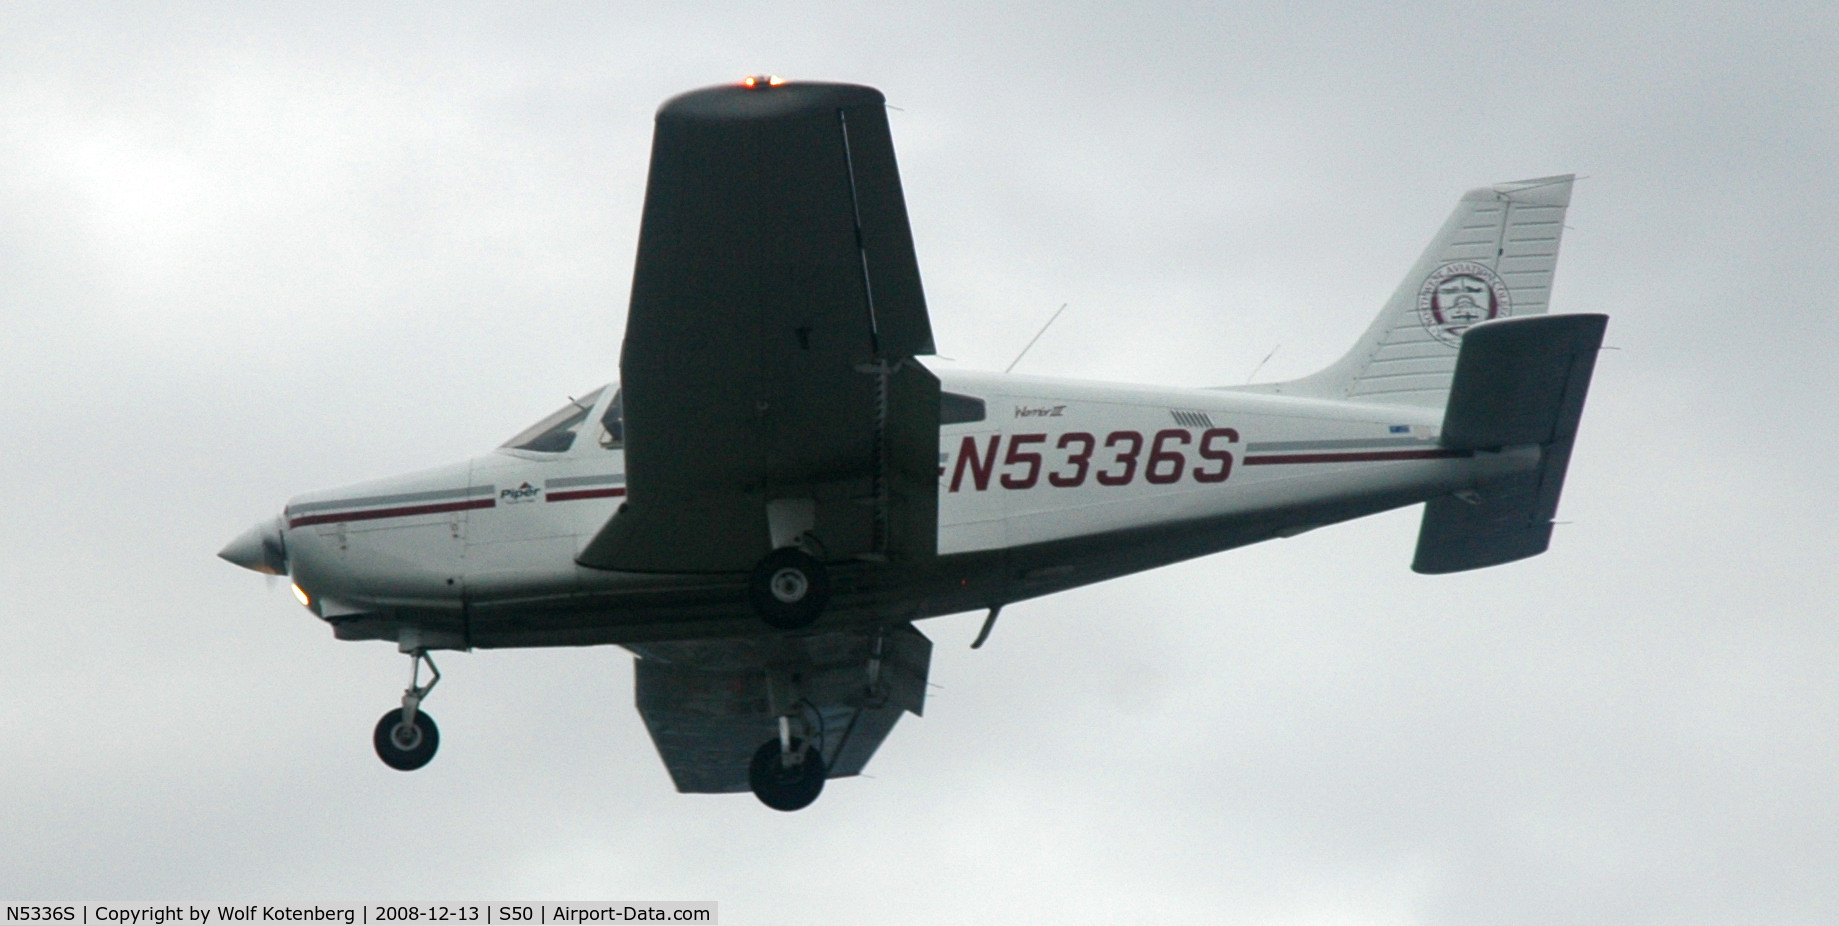 N5336S, Piper PA-28-161 Cherokee Warrior II C/N 2842133, on final,on the day it is to snow in the NW